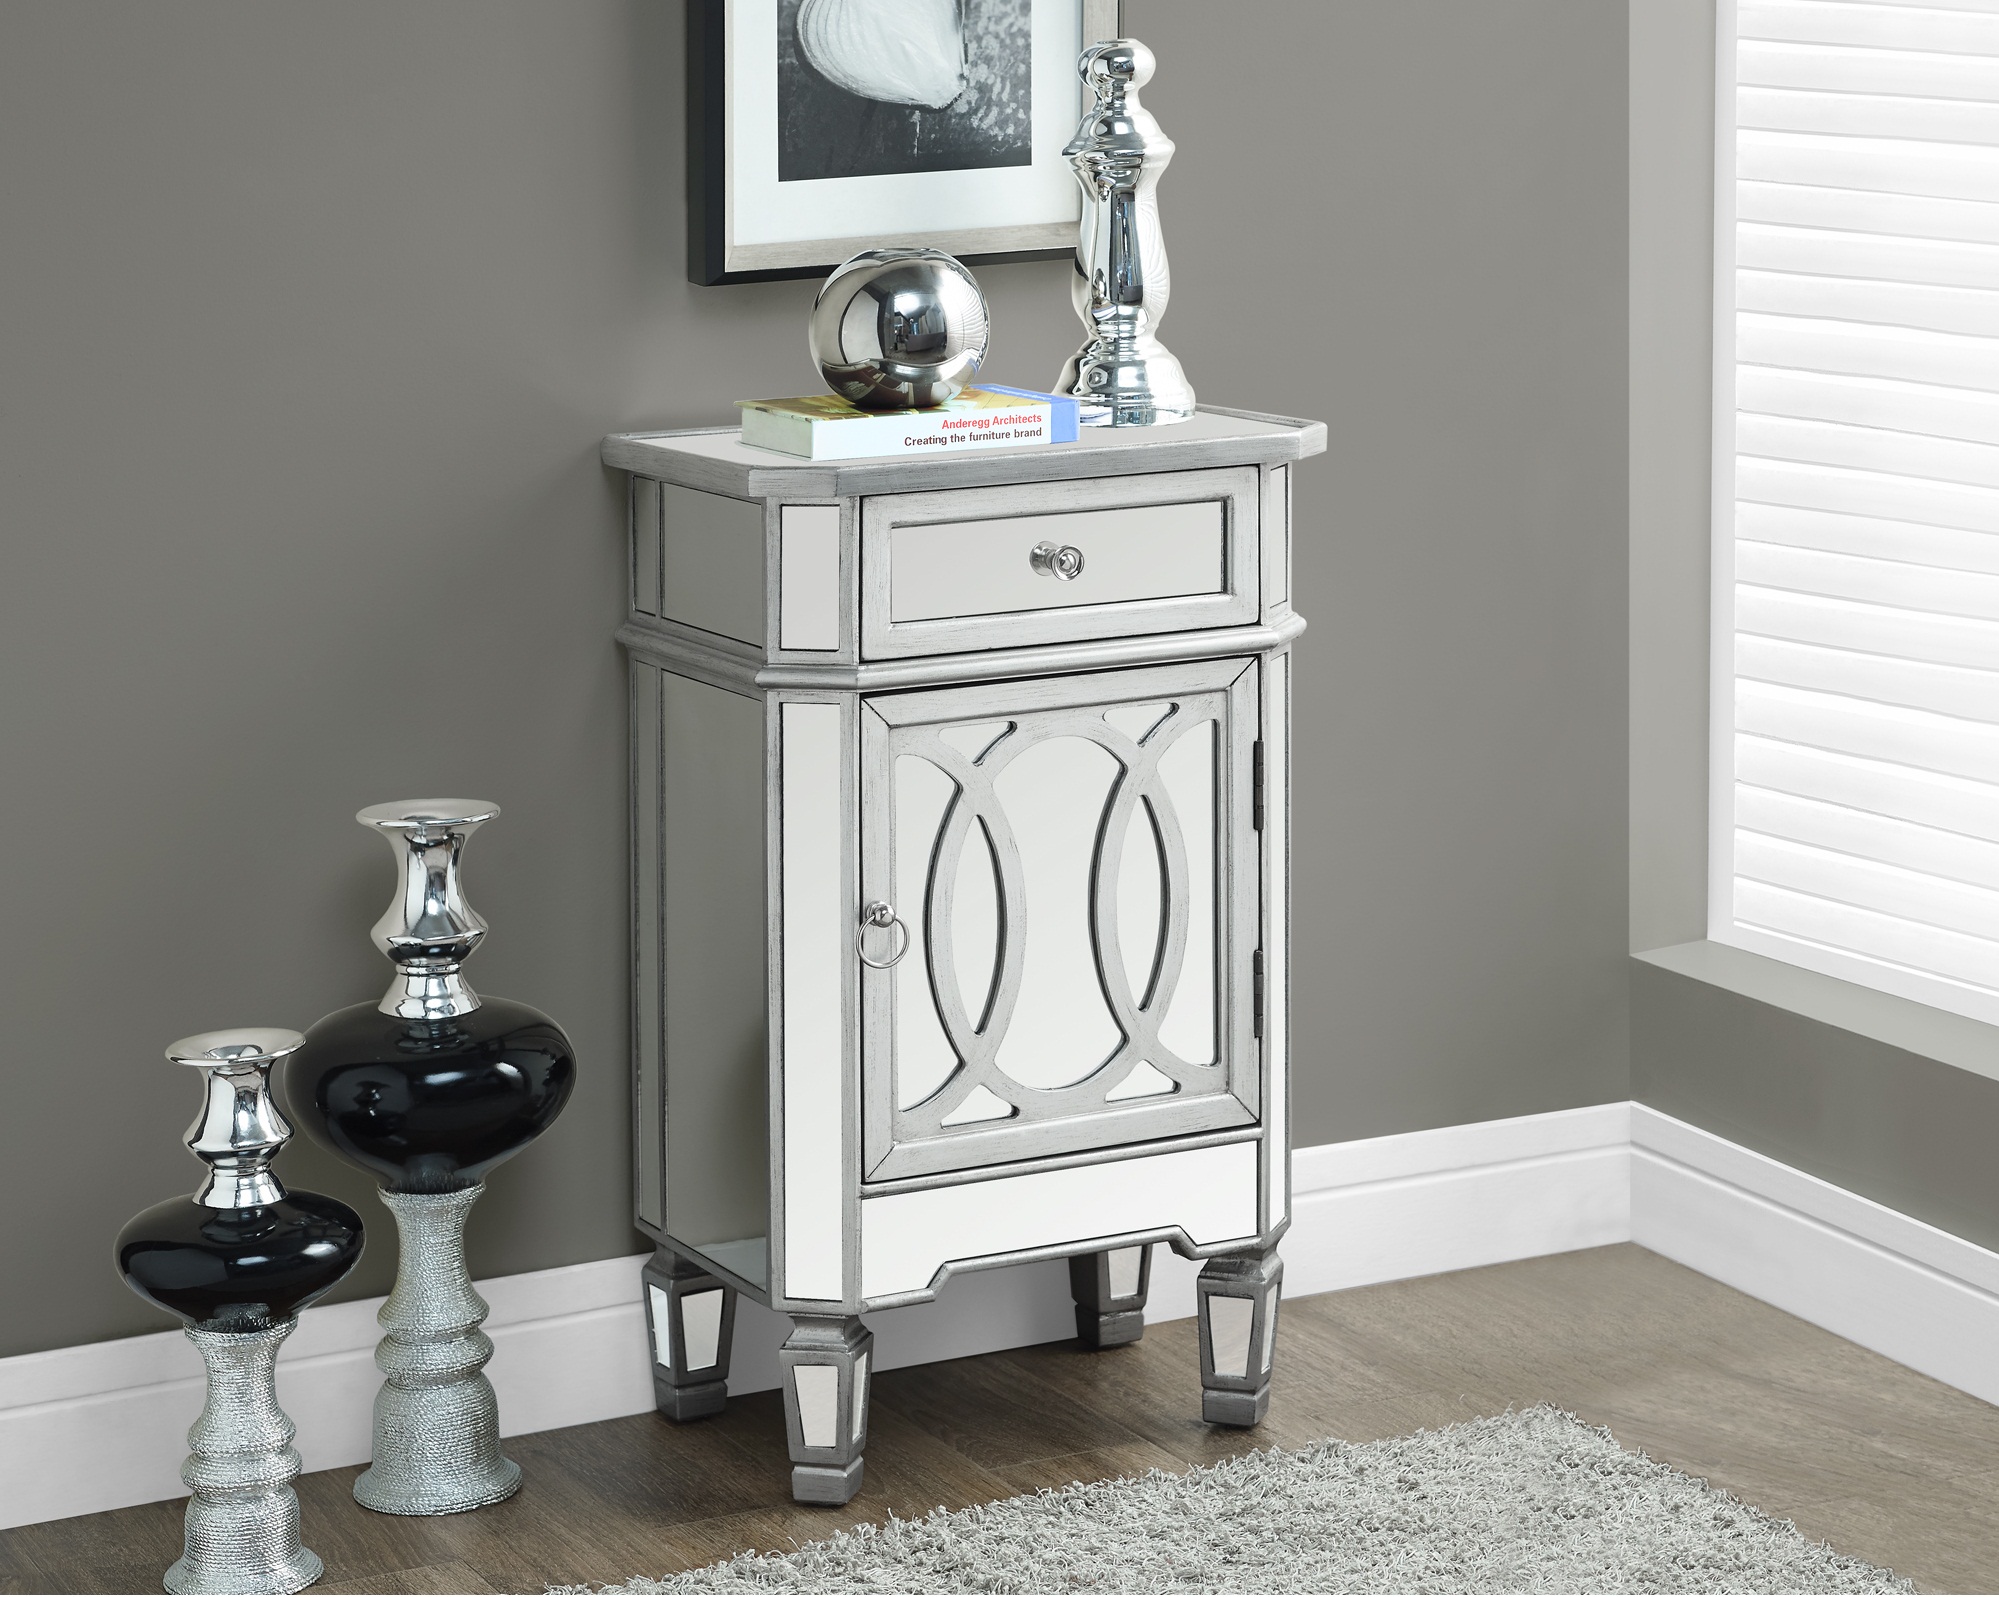 end tables mirrored table tabless cool furniture accent with single drawer brushed surprise from glass side for tall corner square mirror drawers very full size ellen allen clock